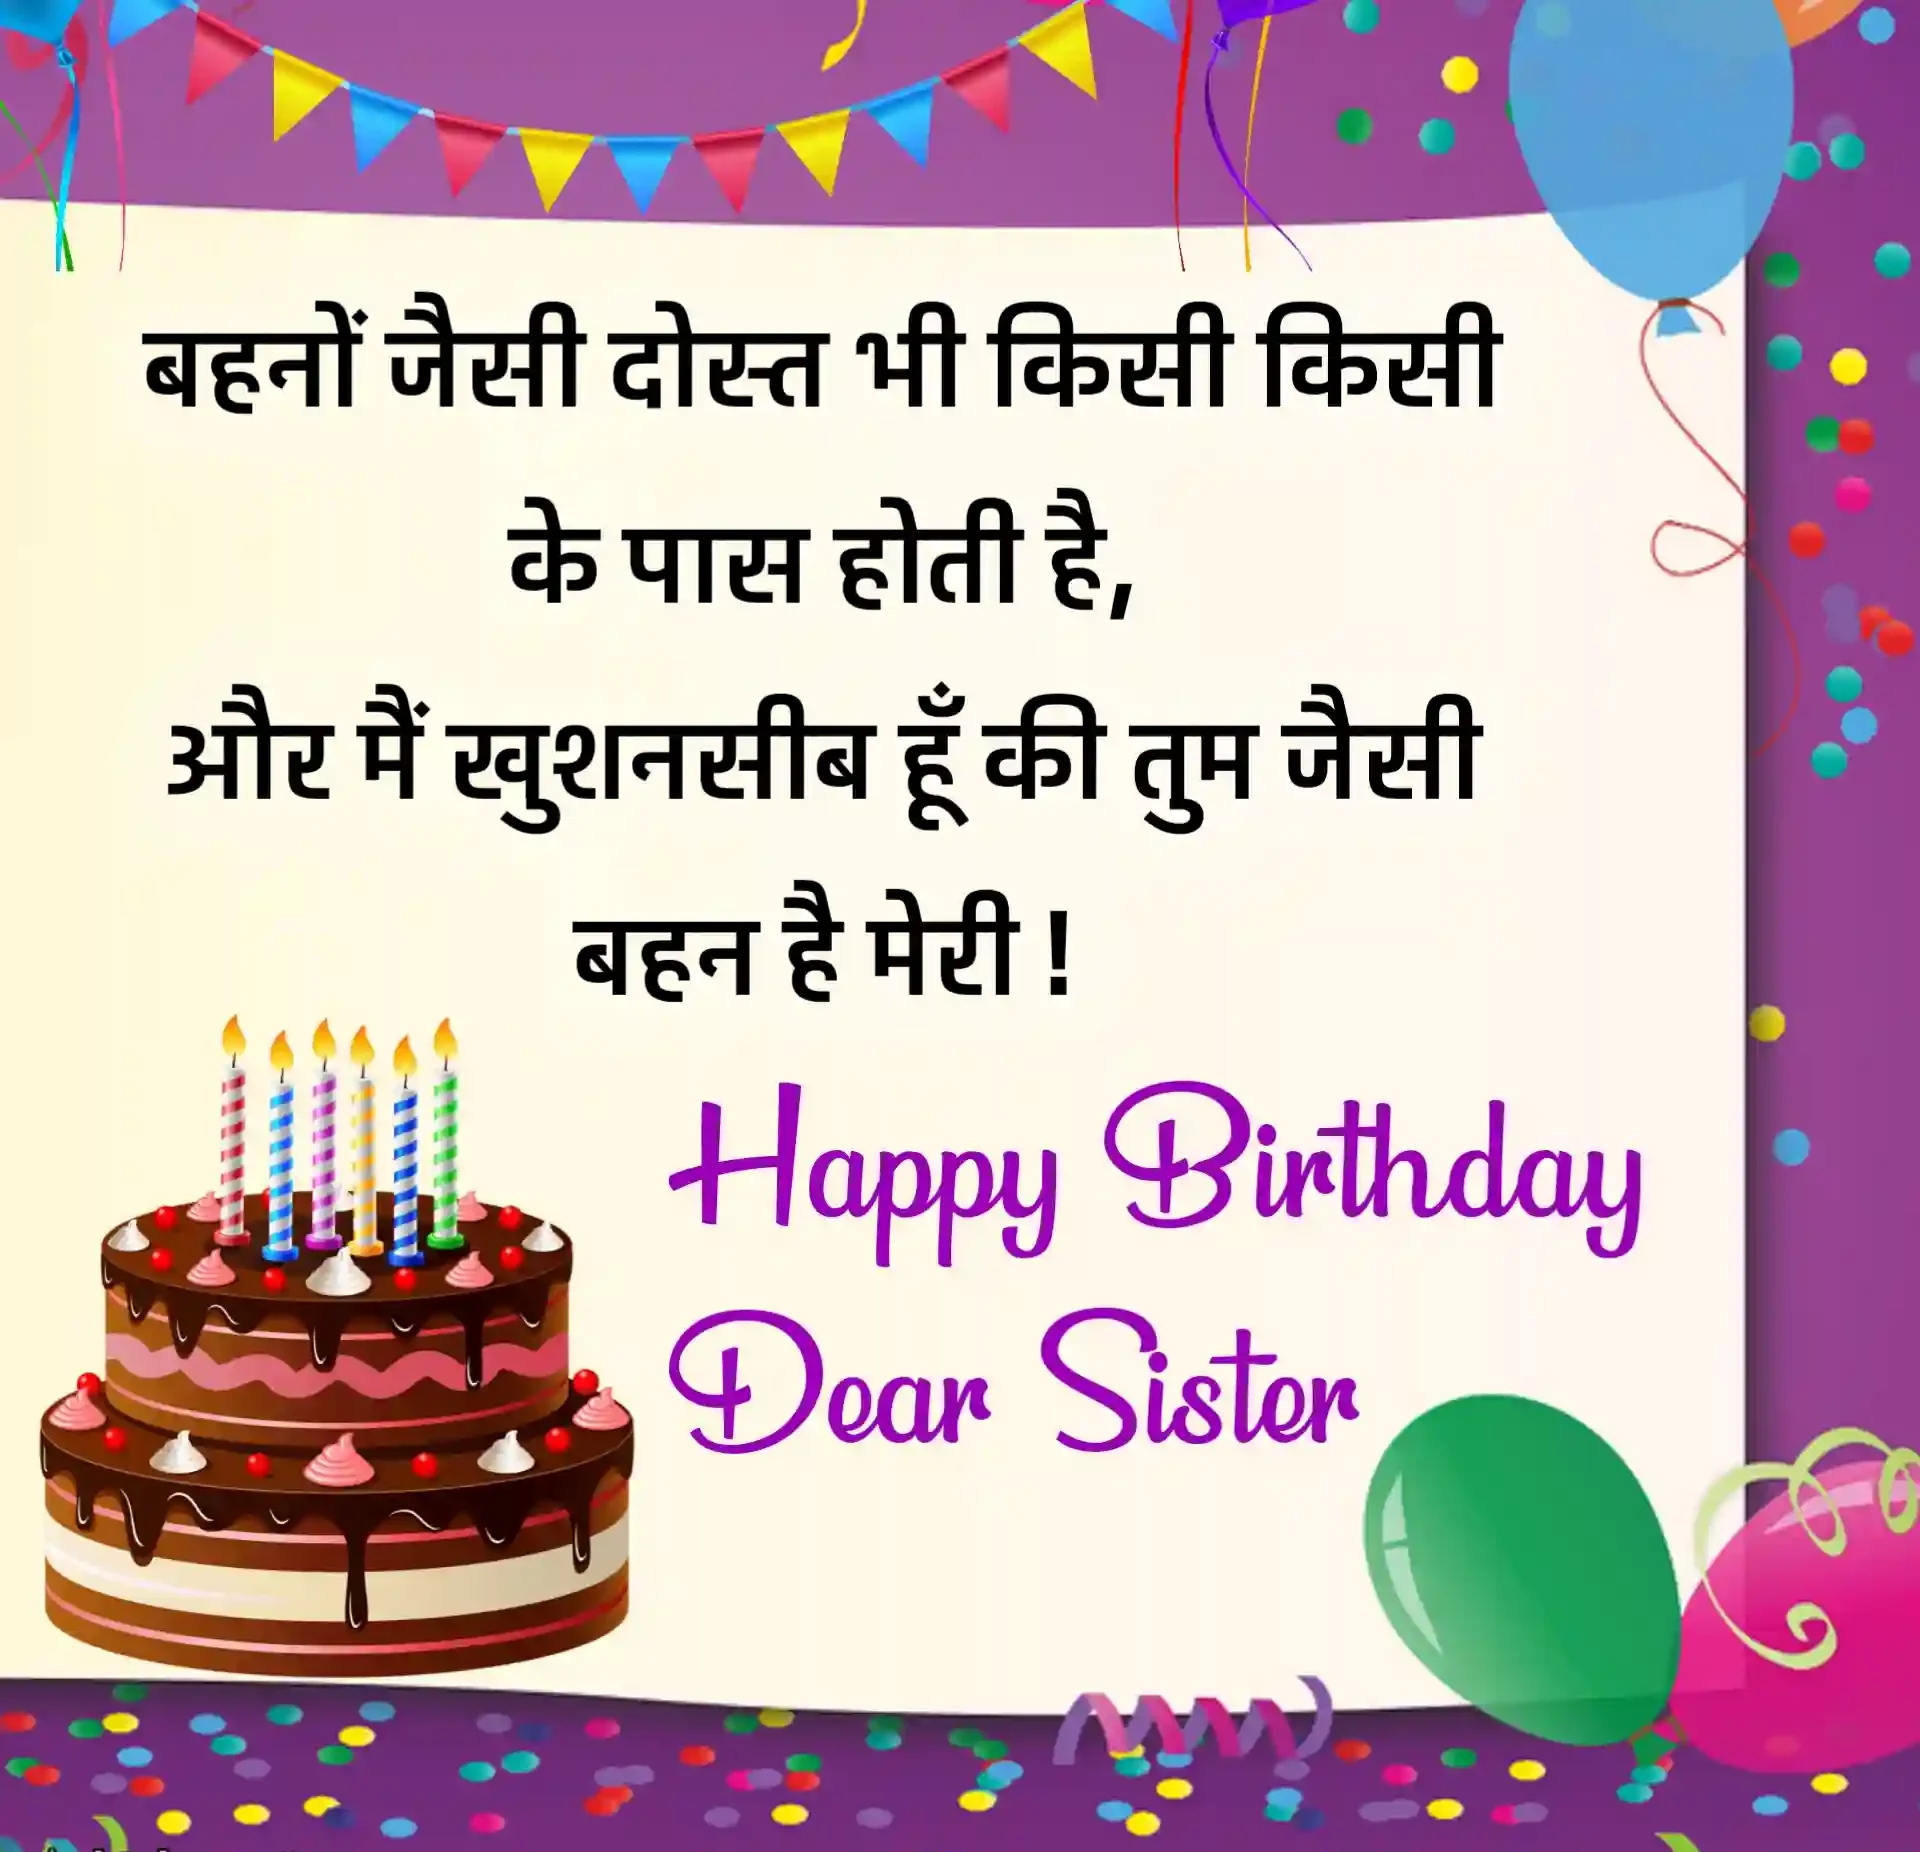 Sister Birthday Wishes in Hindi